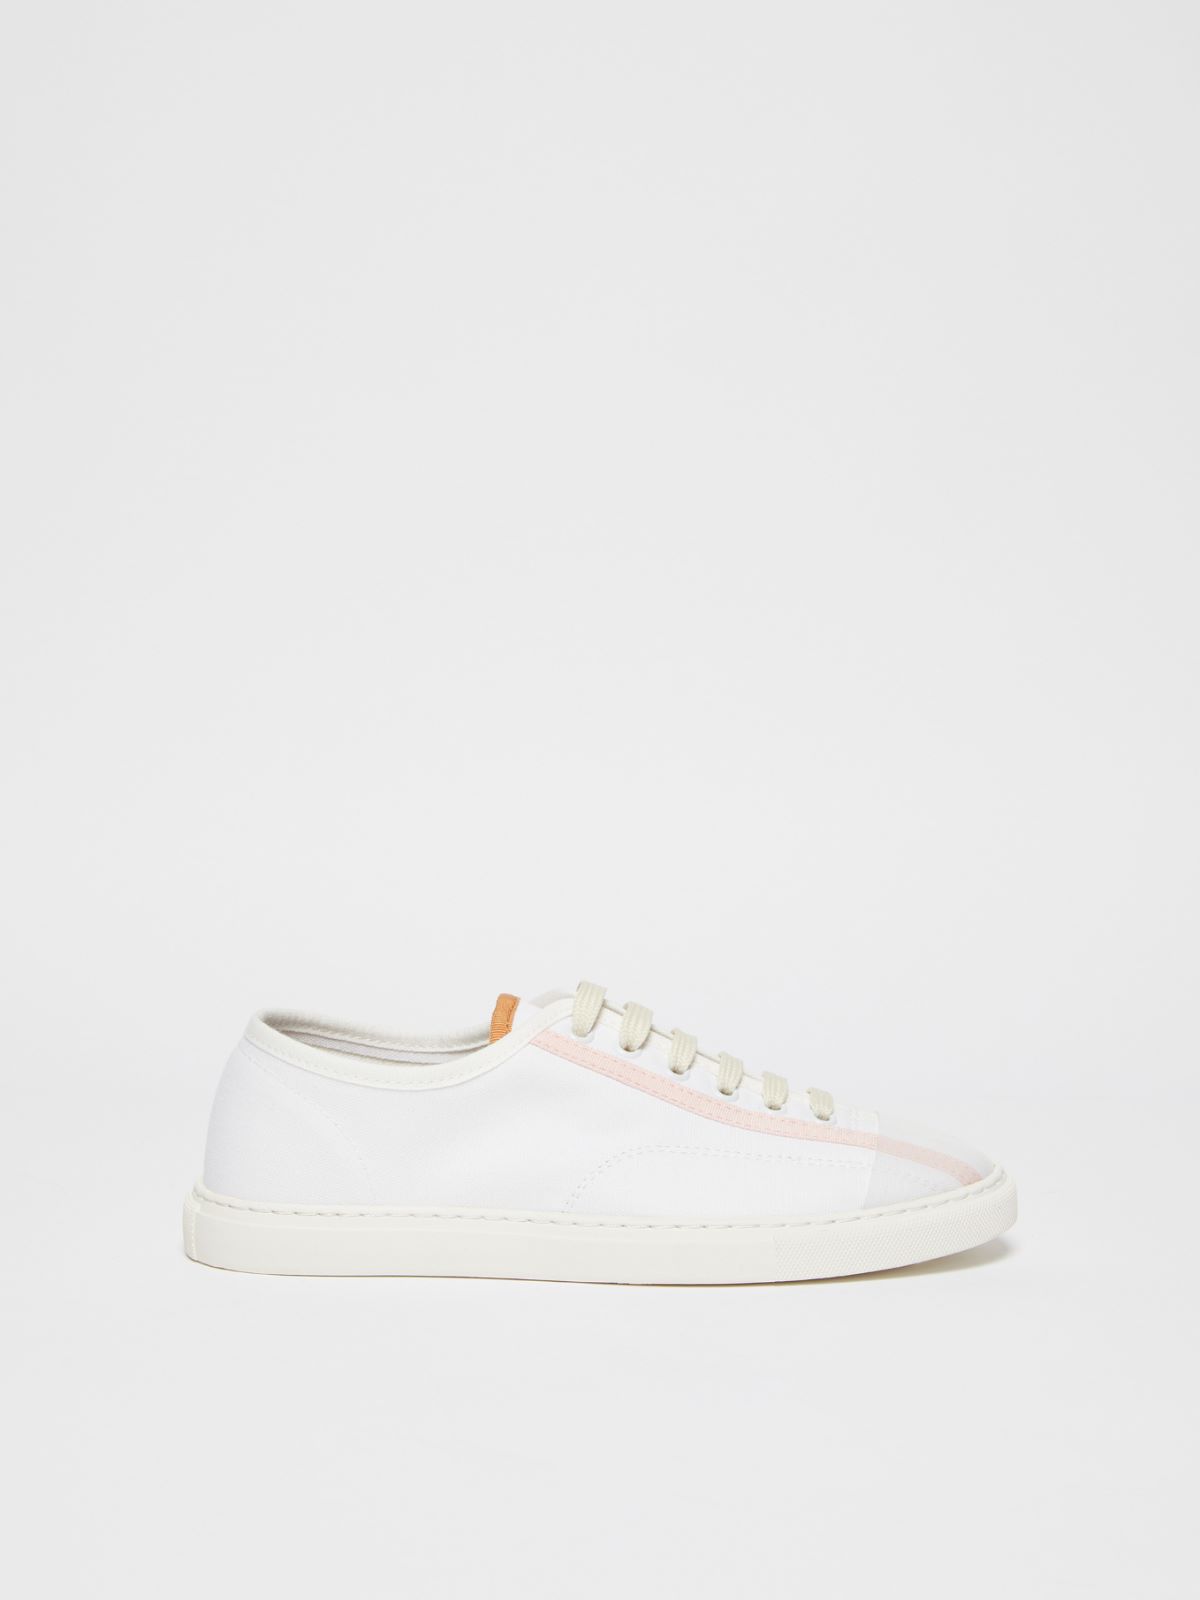 Cotton canvas sneakers, white | Weekend Max Mara